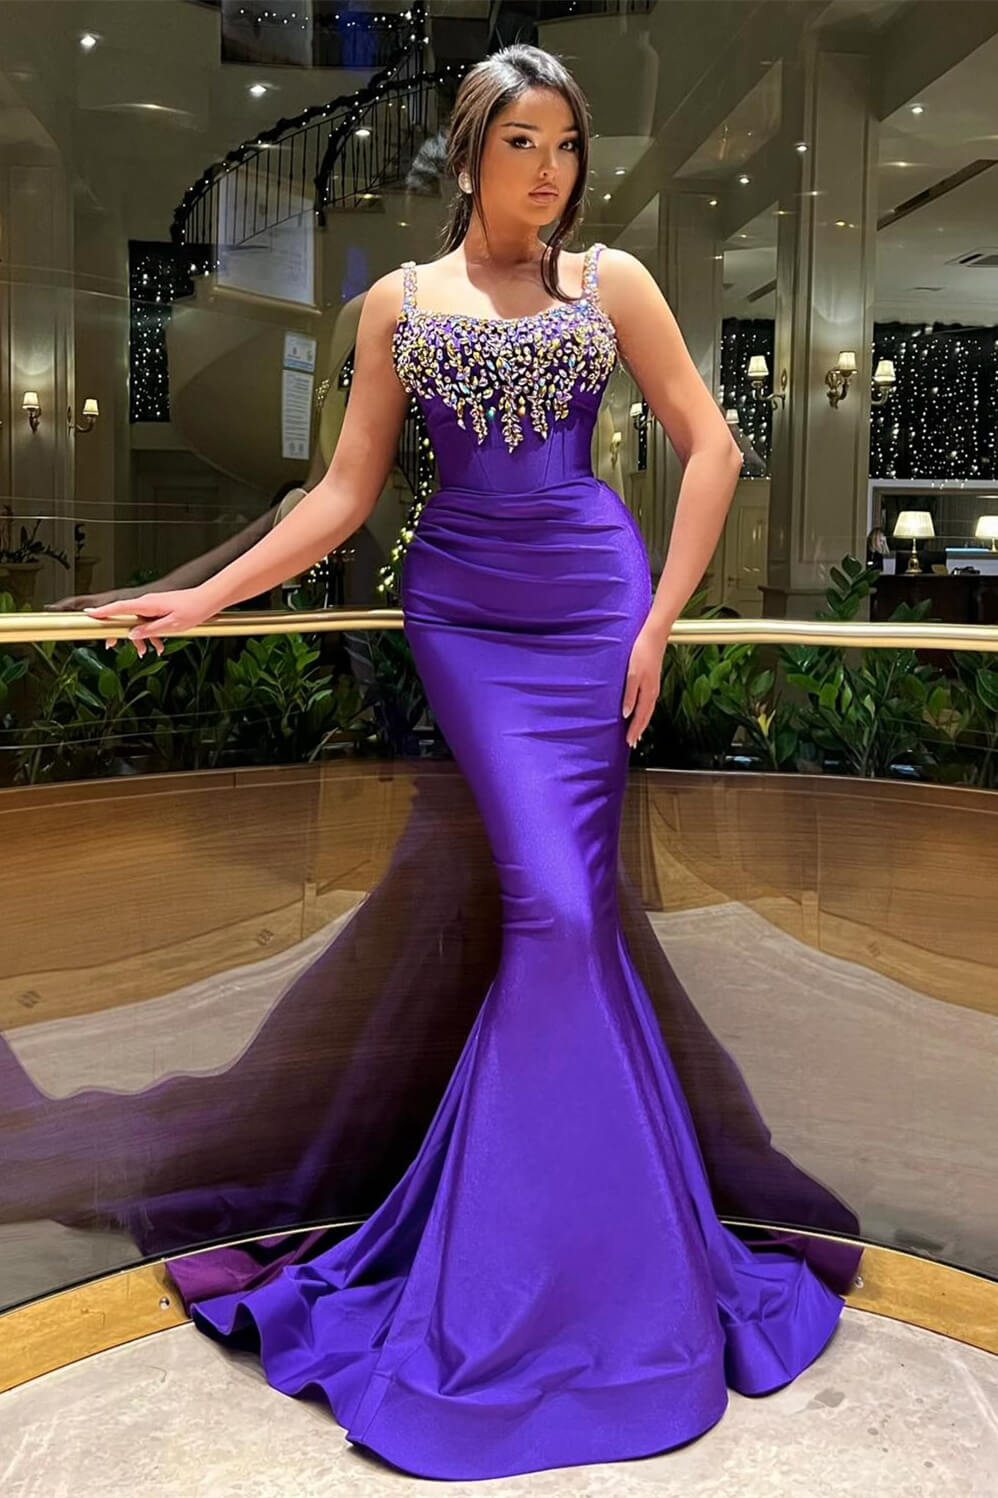 Chic Purple Square Sleeveless Mermaid Evening Gown With Crystals Online - lulusllly